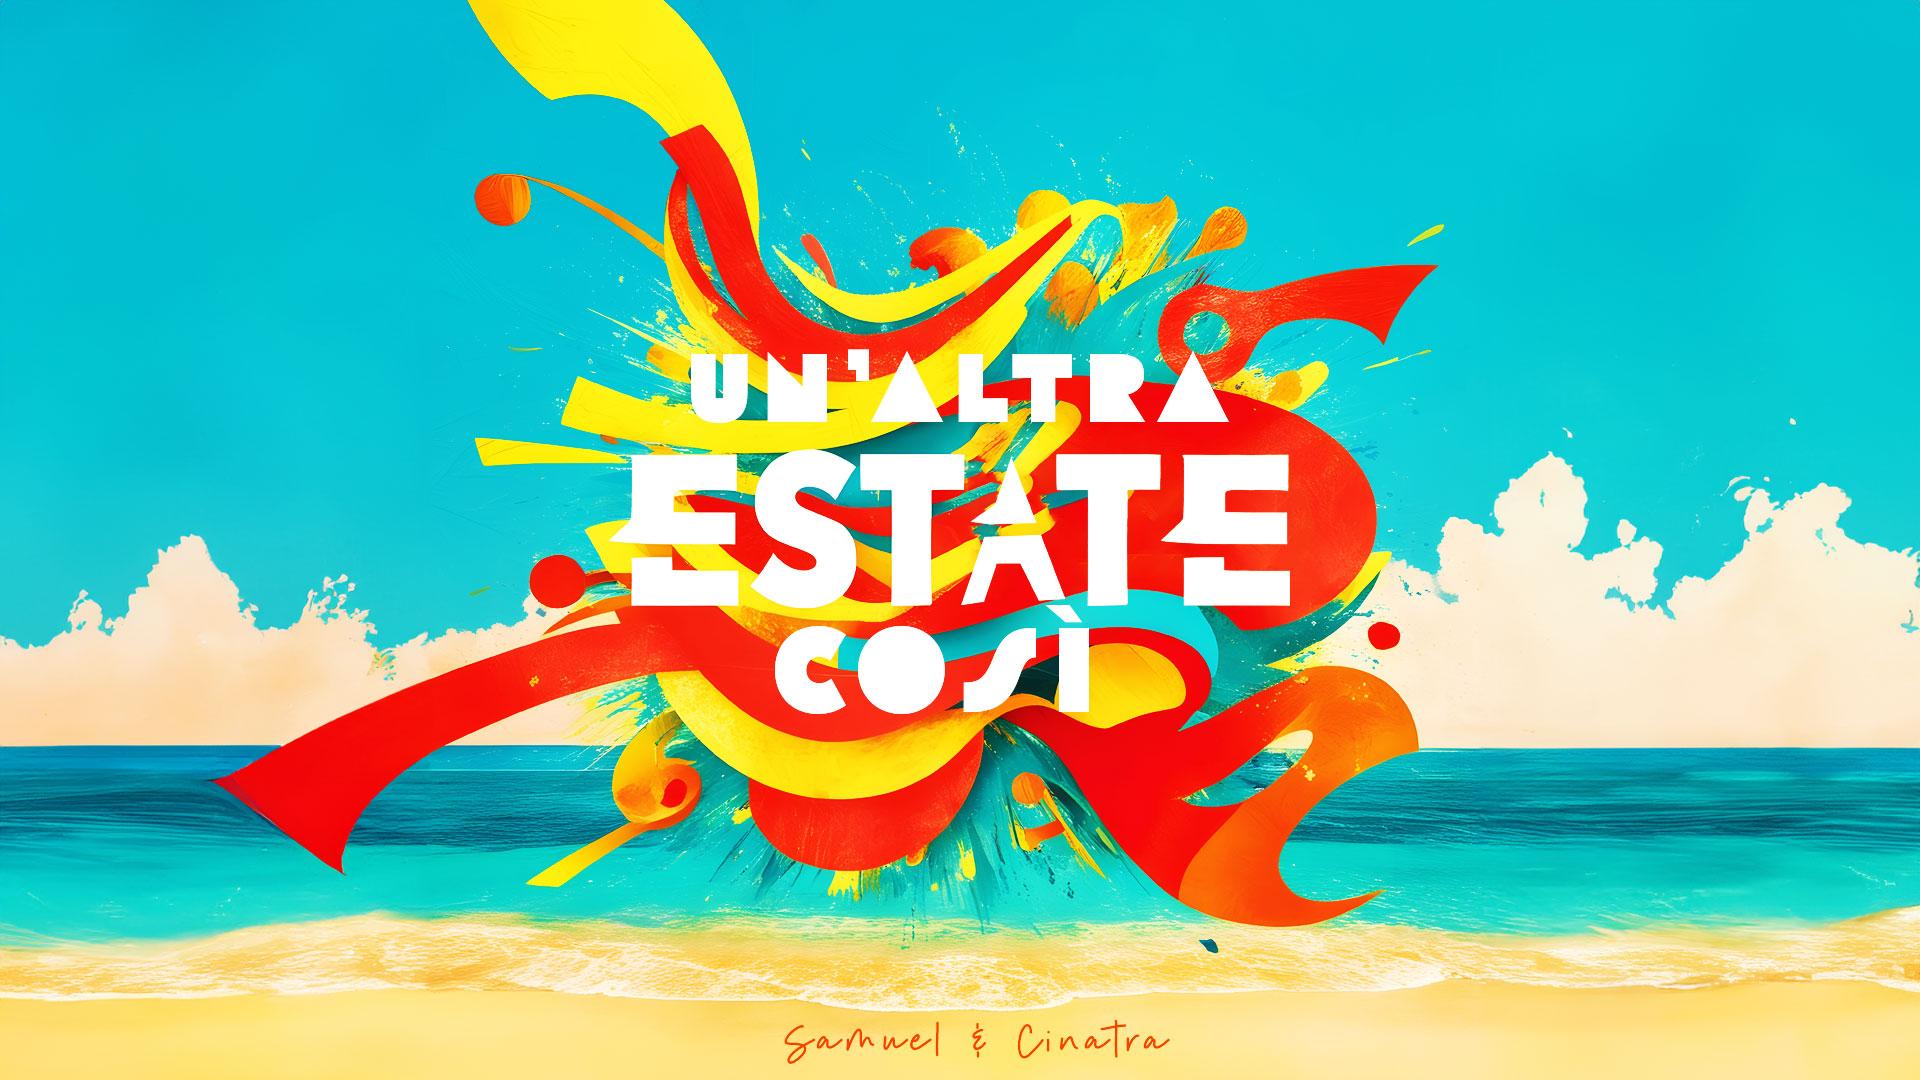 Colorful summer illustration with 'Un'altra estate così' text on a sea and beach background.